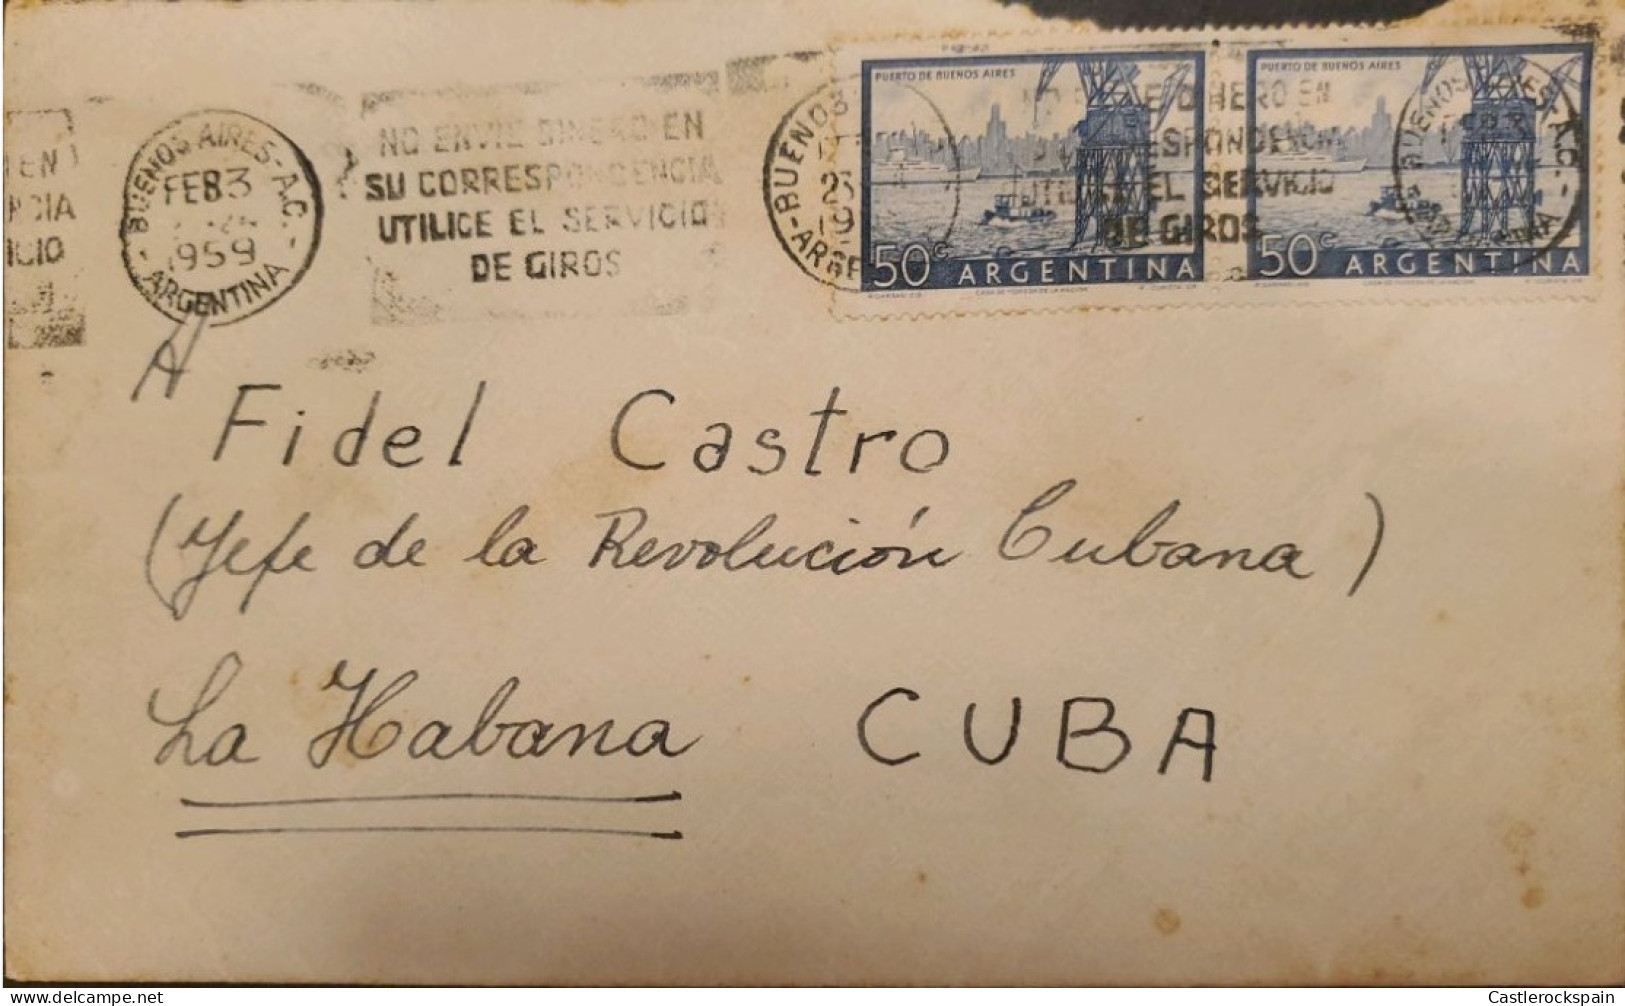 MI) 1959, ARGENTINA, FROM BUENOS AIRES TO HAVANA, FIDEL CASTRO, WITH CANCELLATION SLOGAN DO NOT SEND MONEY IN YOUR CORRE - Used Stamps